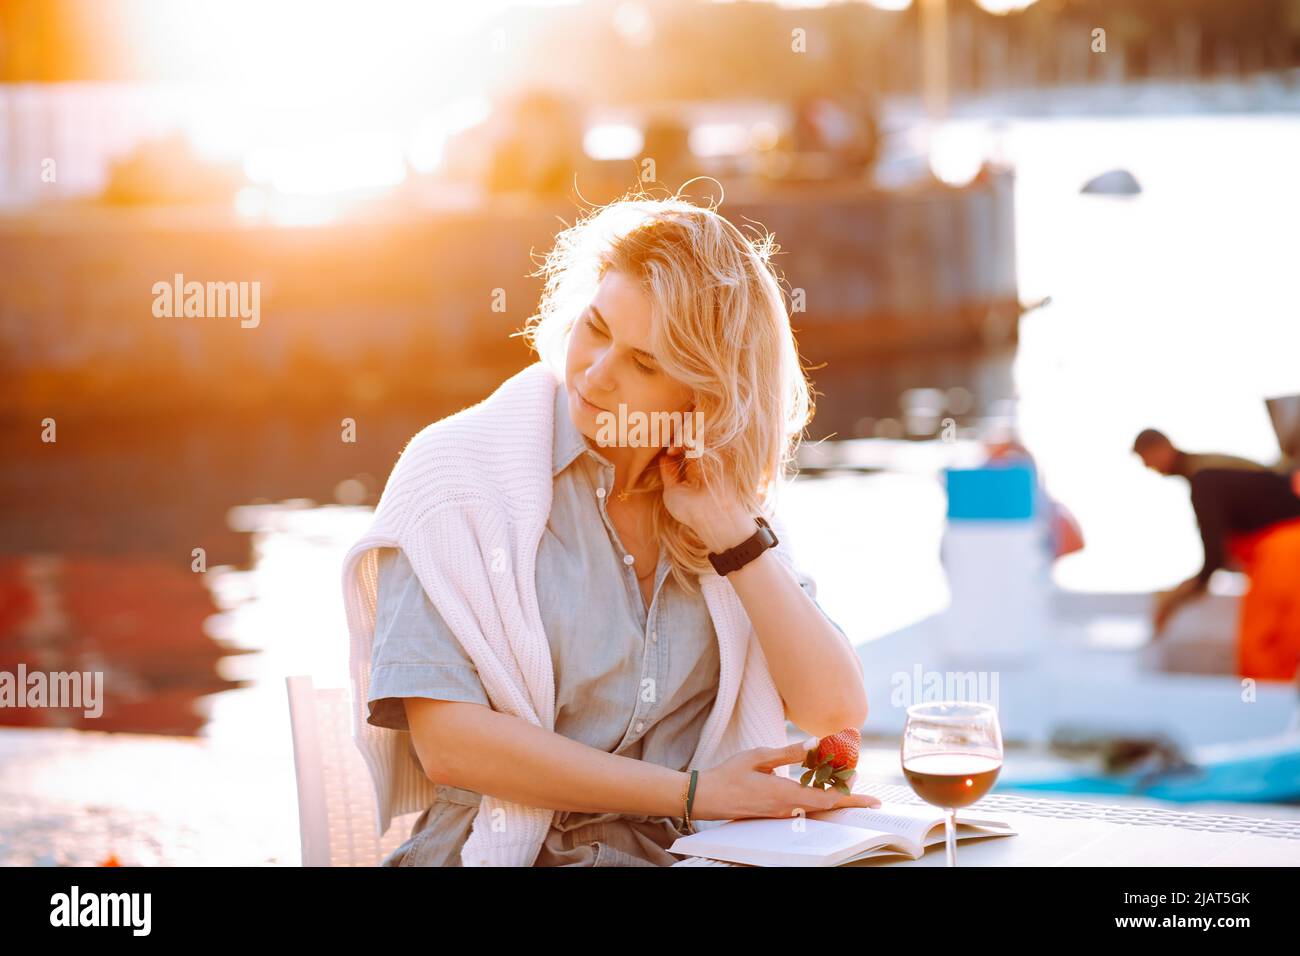 Portrait of young beautiful woman with long wavy fair hair sitting at table with glass of red wine and book at sunset. Stock Photo